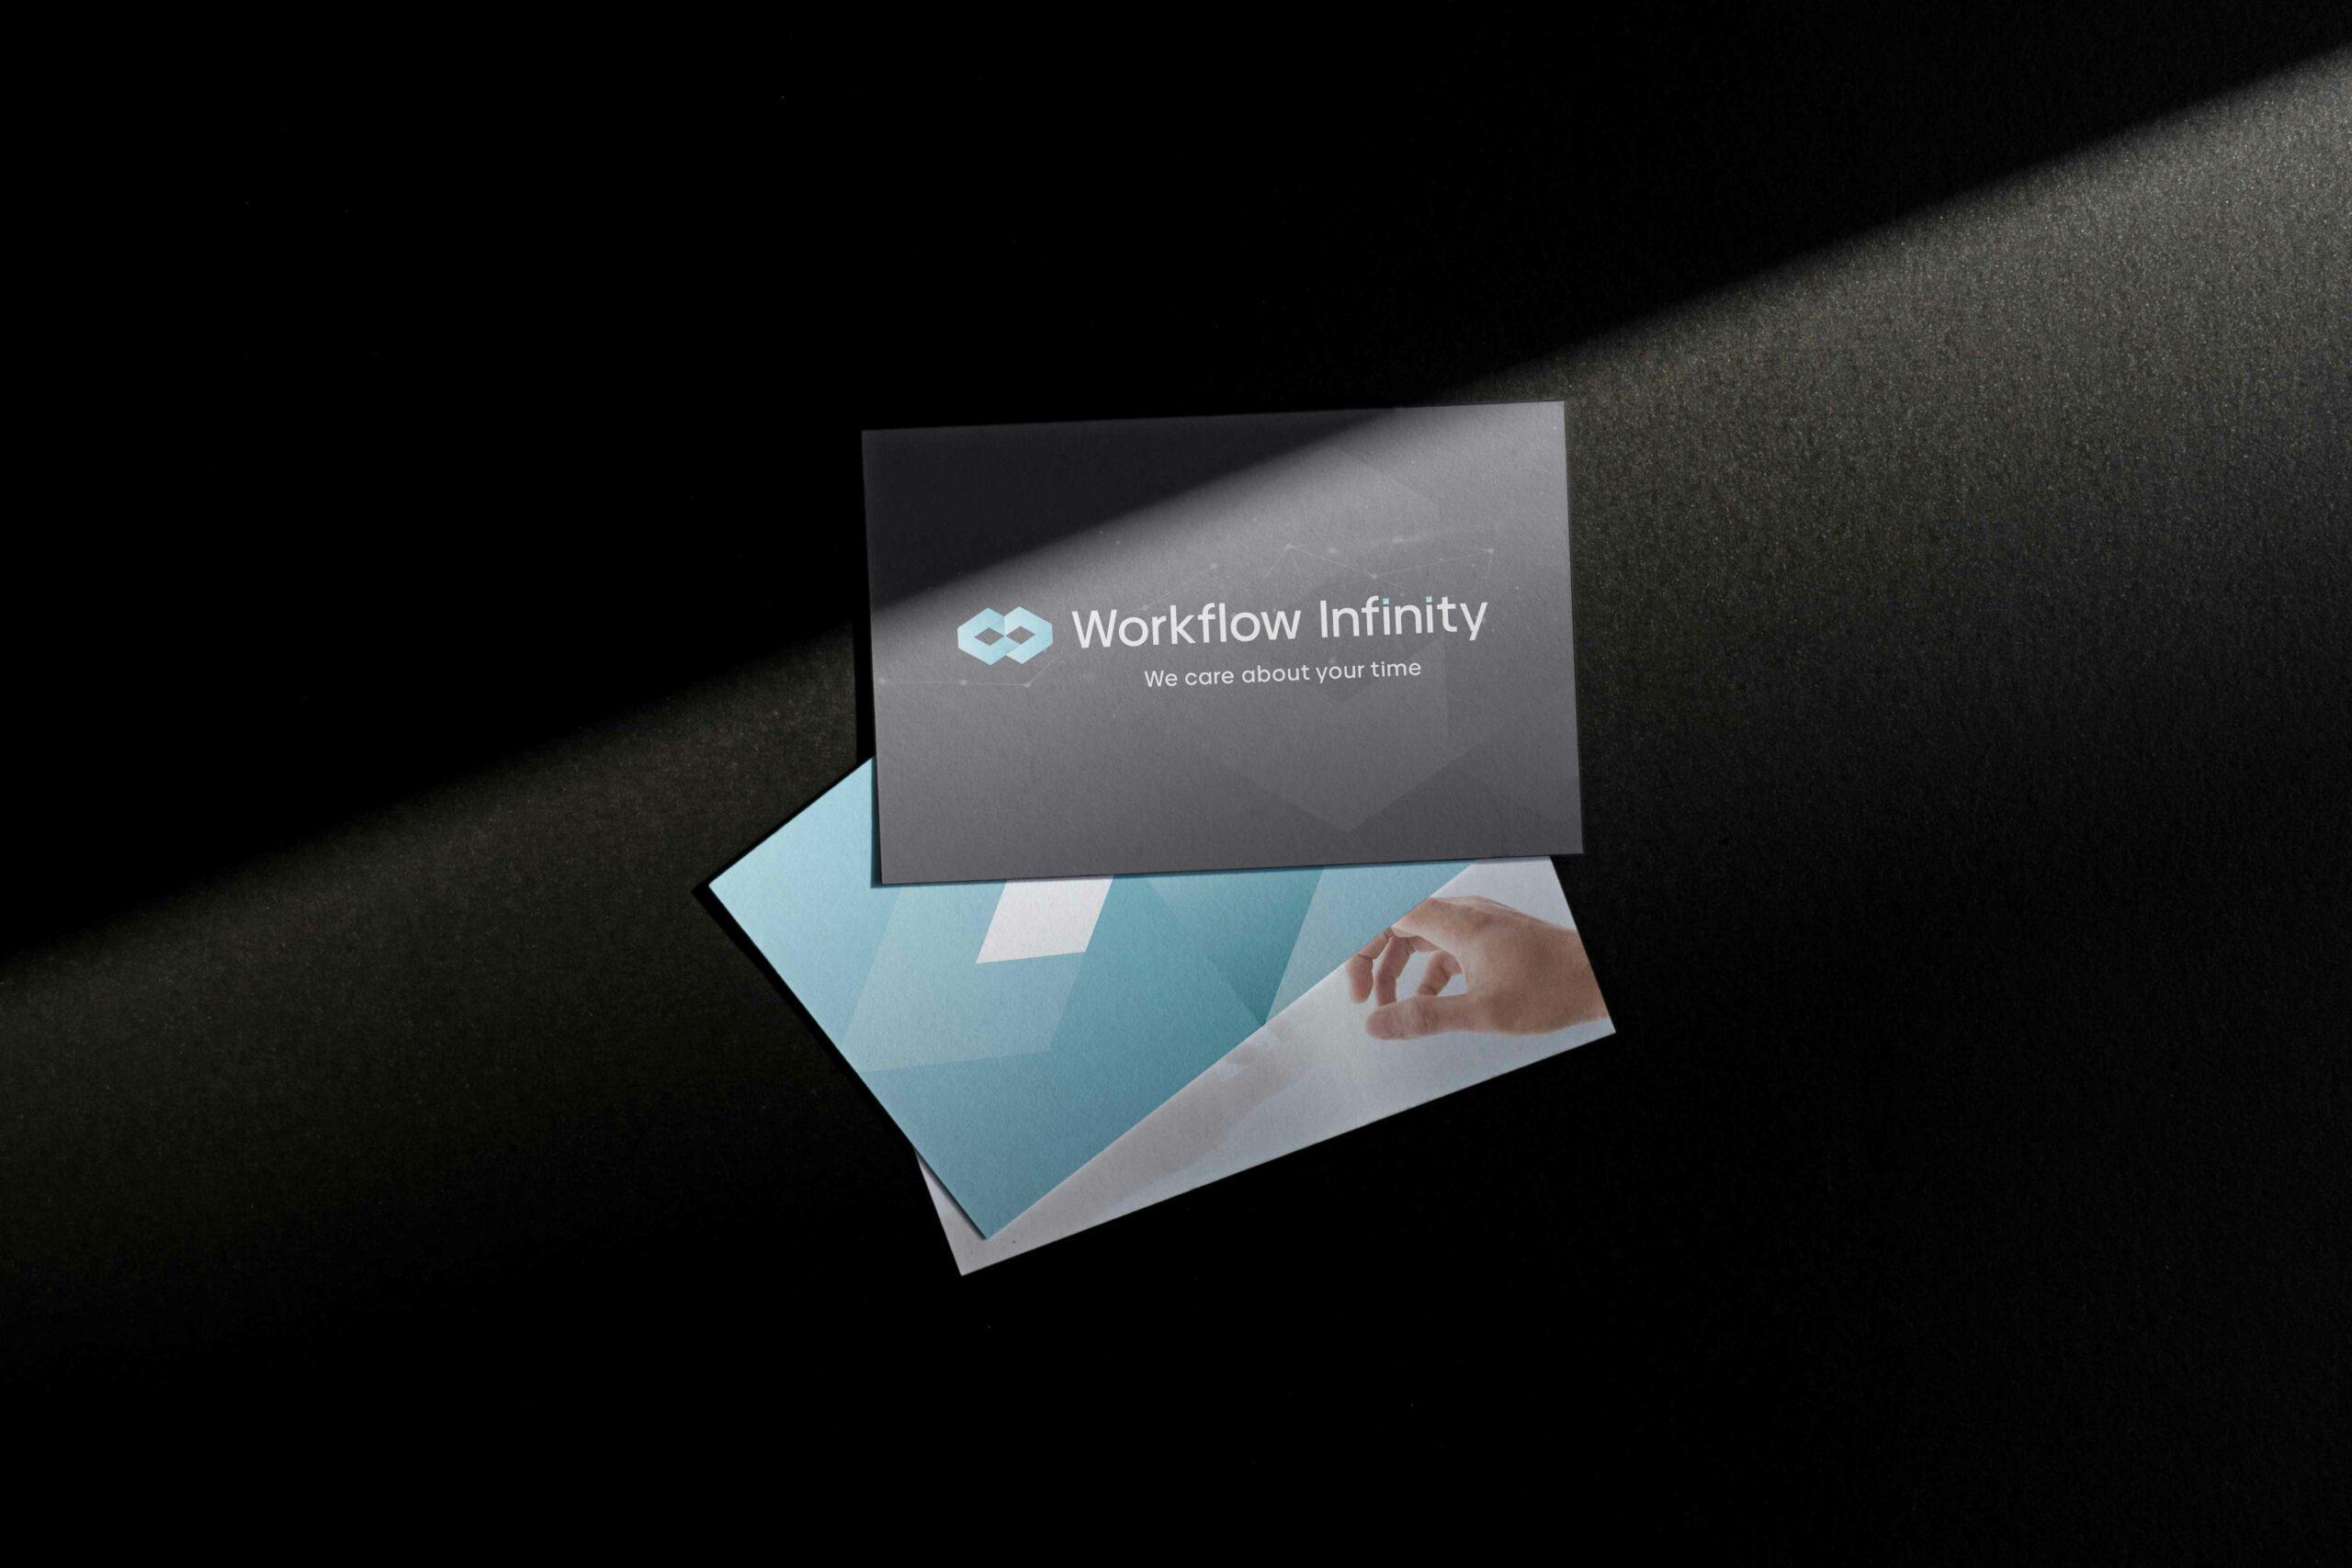 Blue and grey business card design for Workflow Infinity created by Rapid Agency